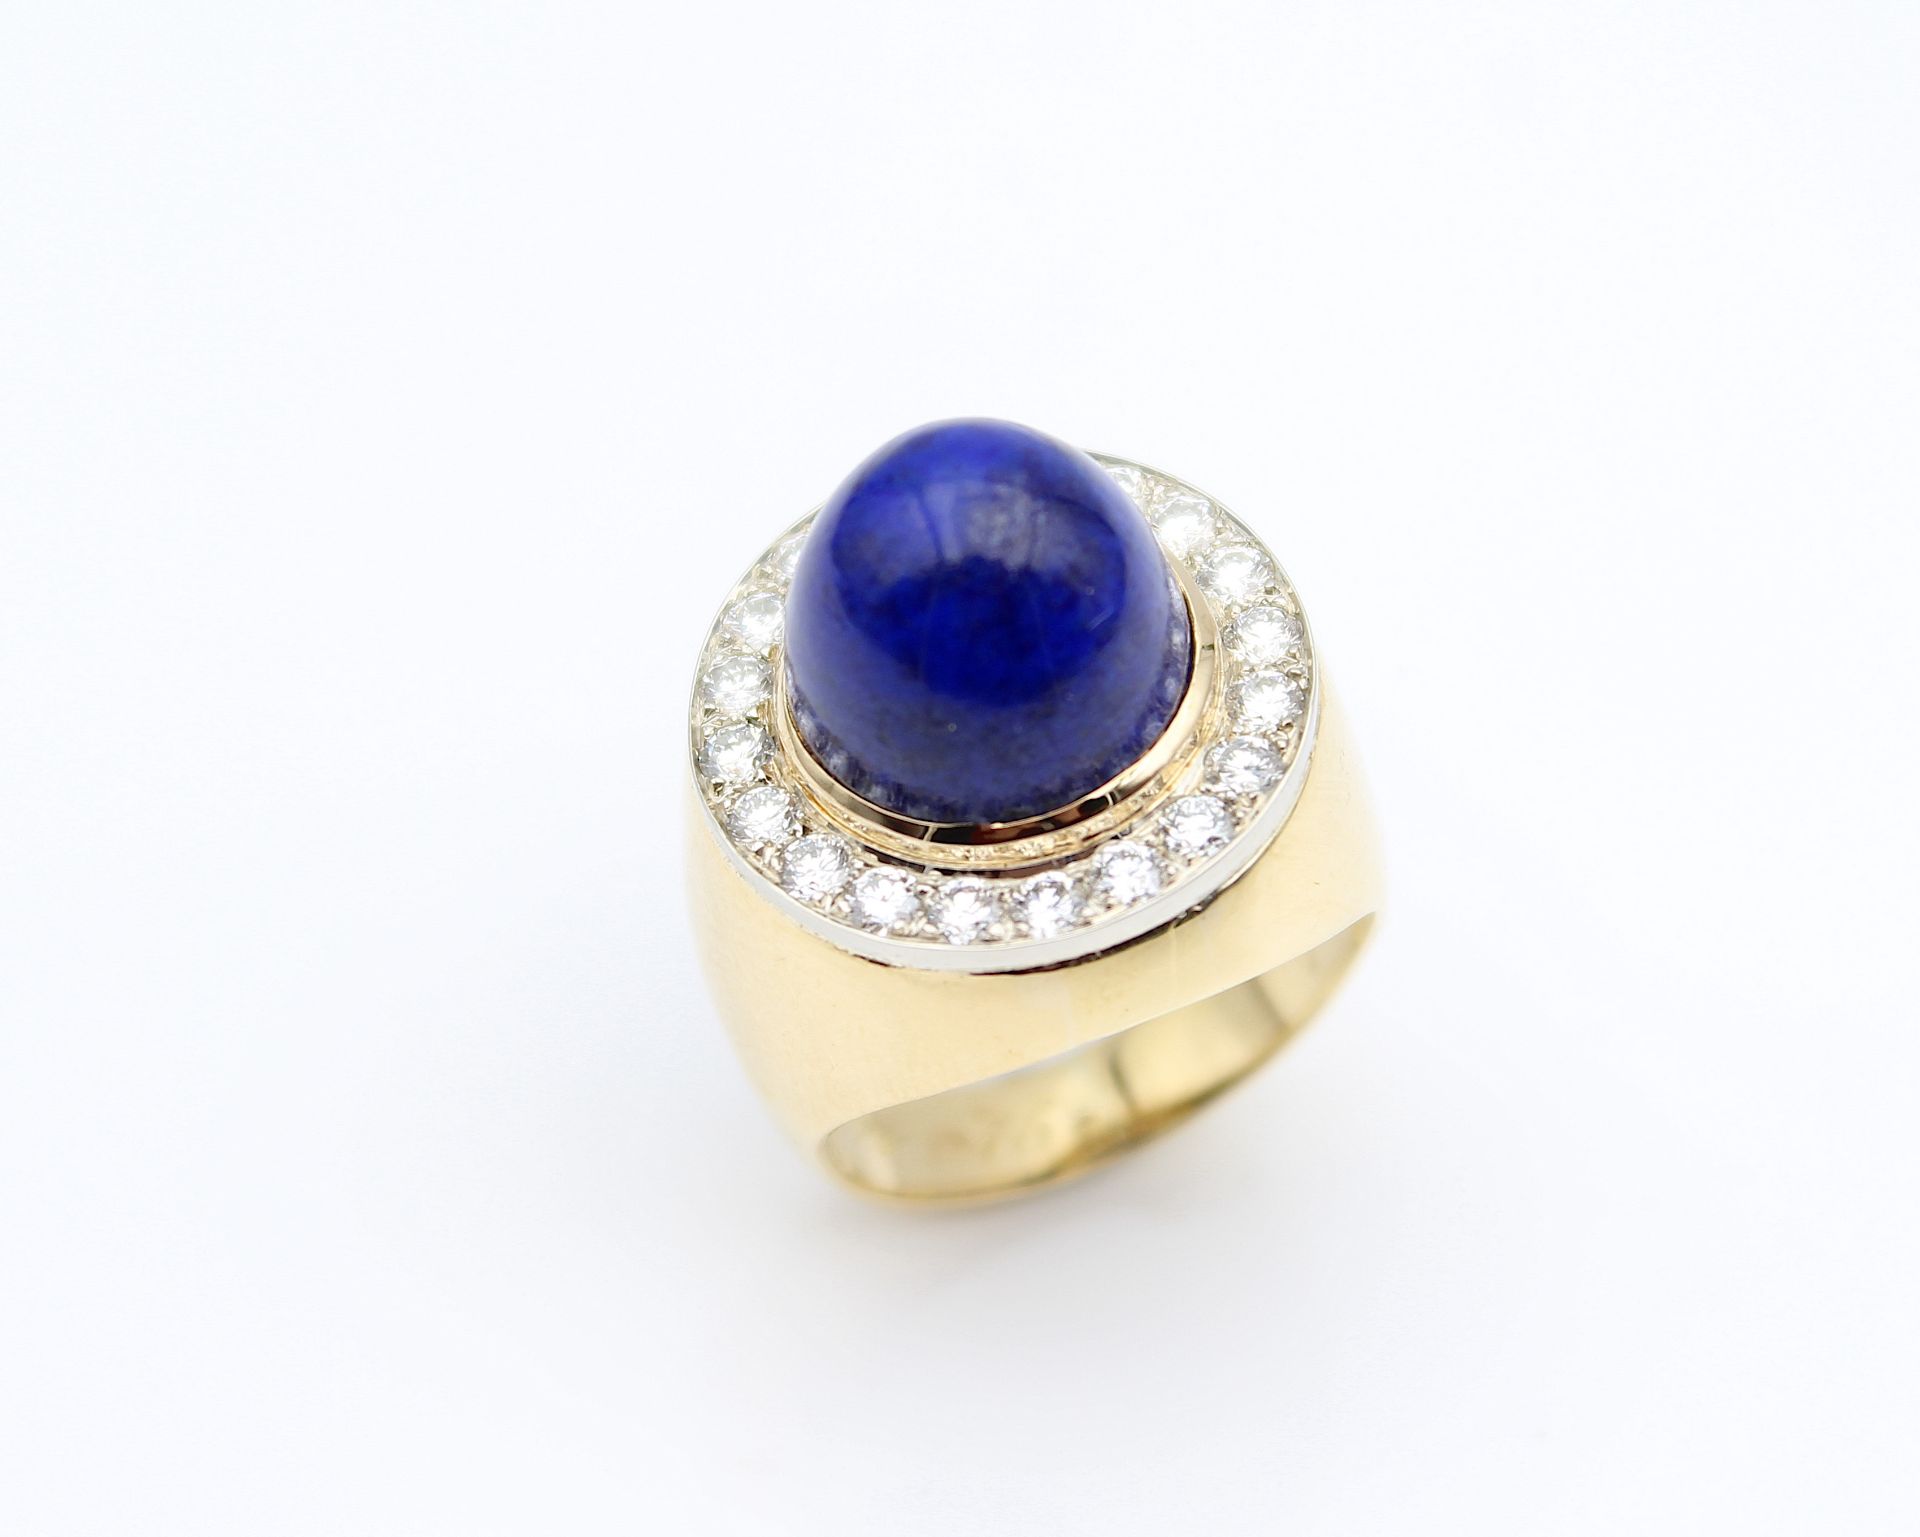 Exclusive ring from Vienna with lapis lazuli and brilliants